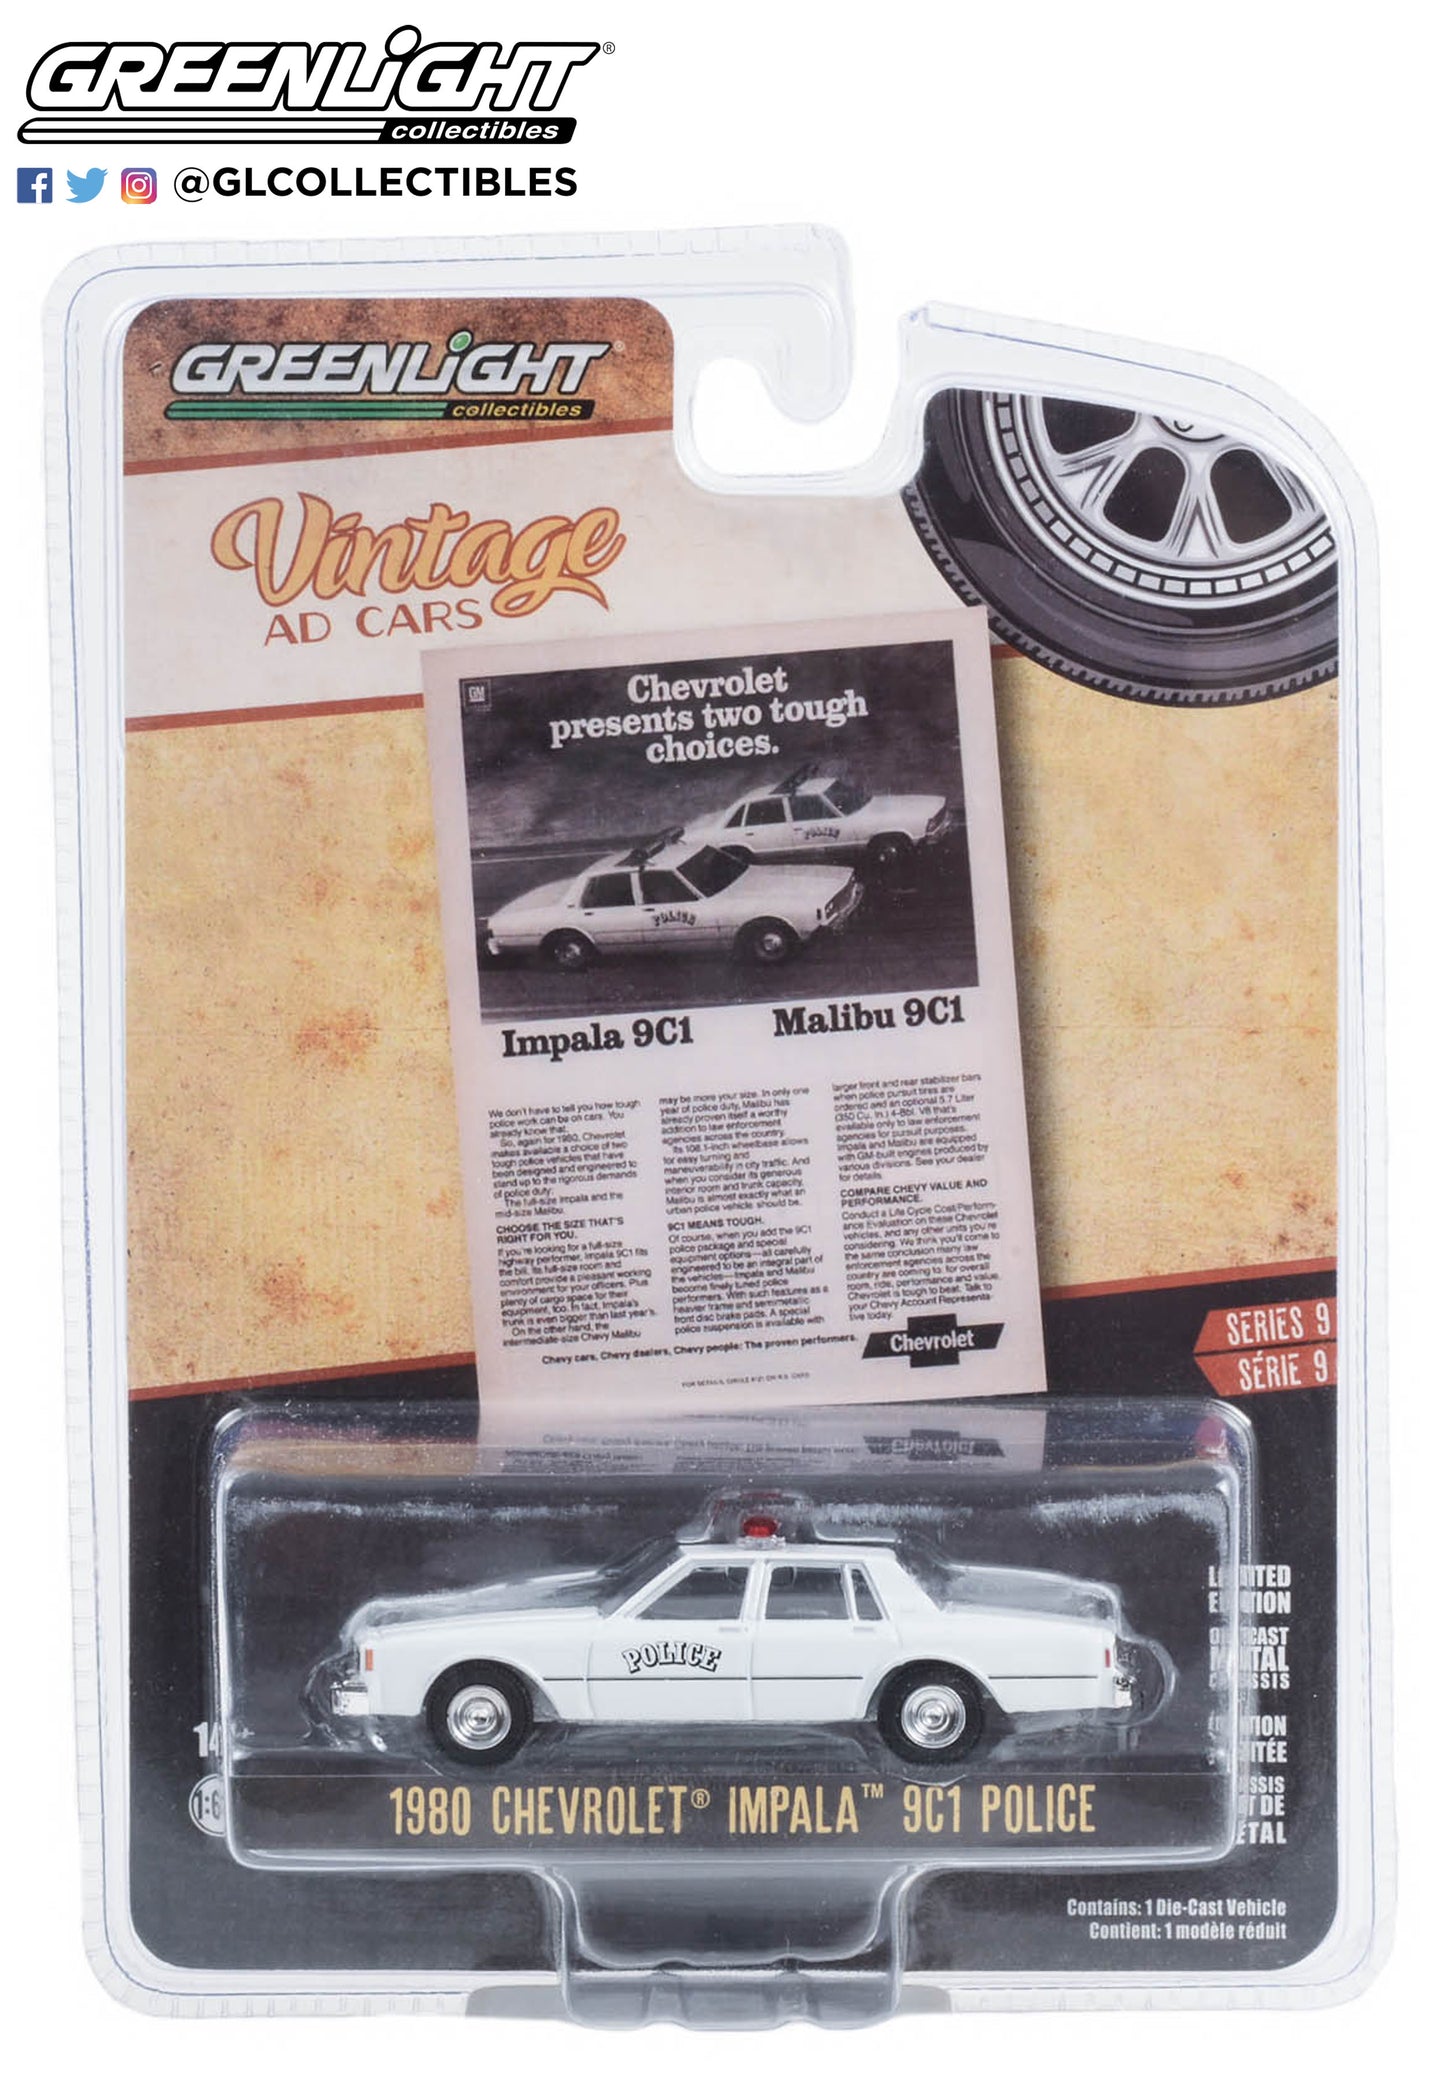 GreenLight 1:64 Vintage Ad Cars Series 9 - 1980 Chevrolet Impala 9C1 Police “Chevrolet Presents Two Tough Choices” 39130-E